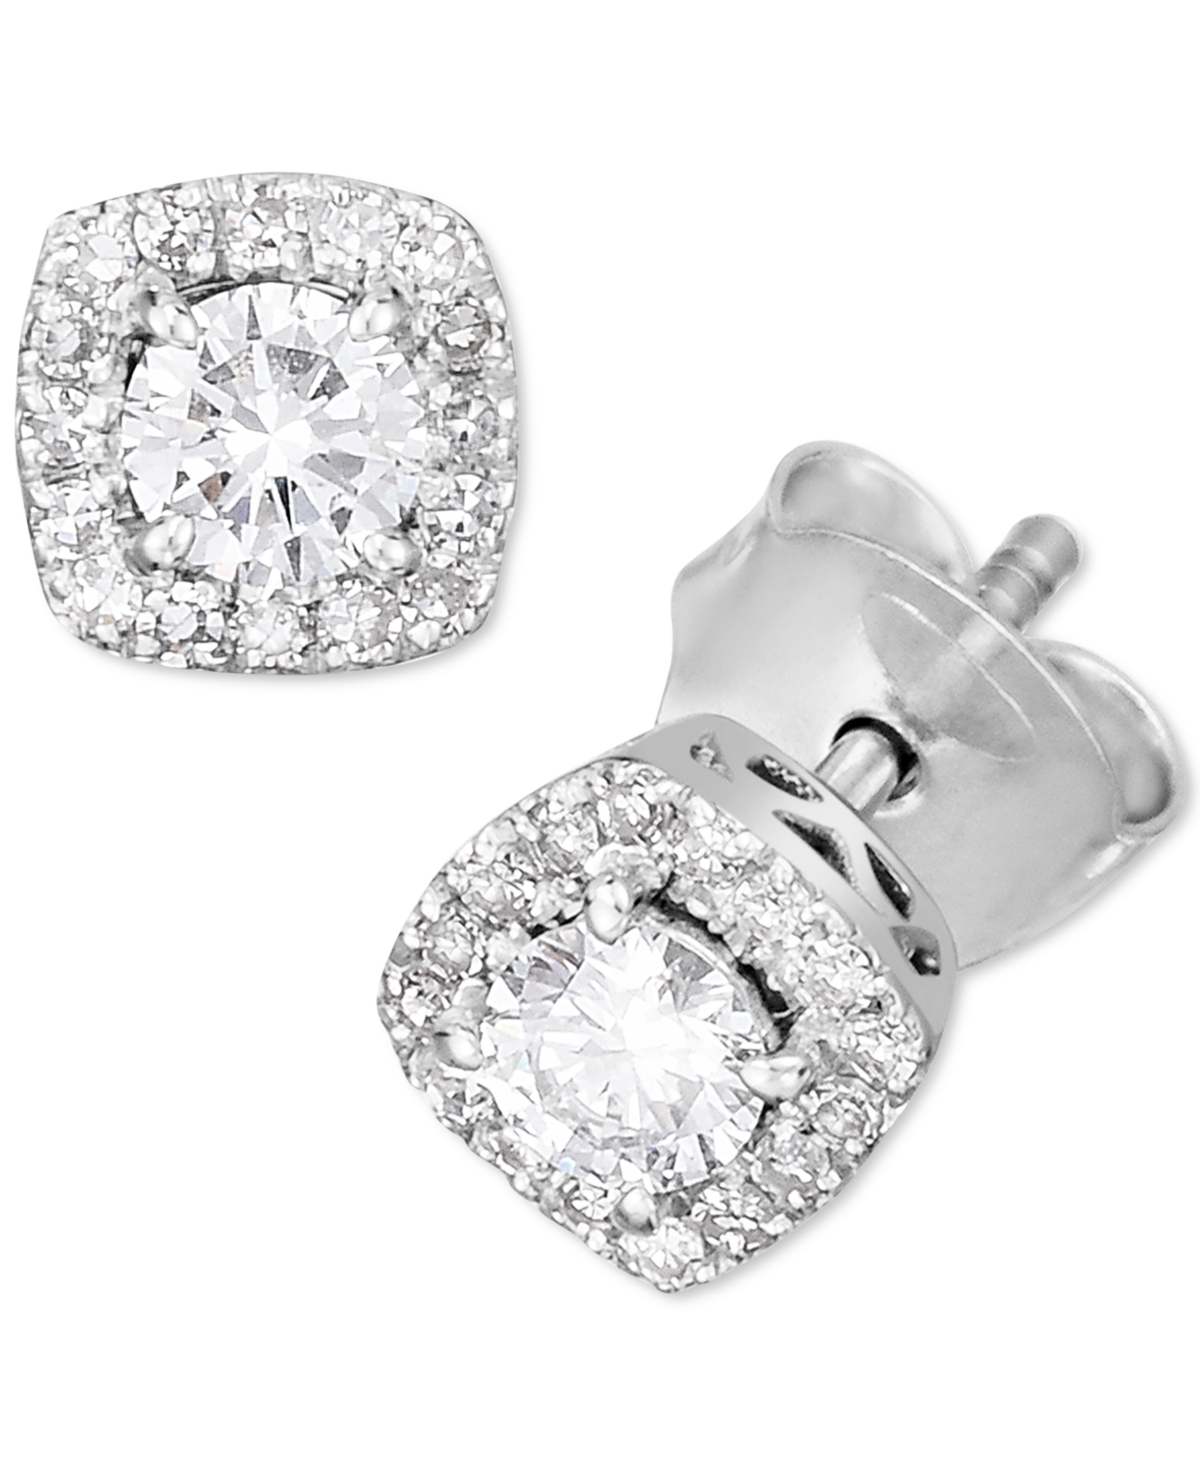 FOREVER GROWN DIAMONDS LAB-CREATED DIAMOND HALO STUD EARRINGS (1/2 CT. T.W.) IN STERLING SILVER